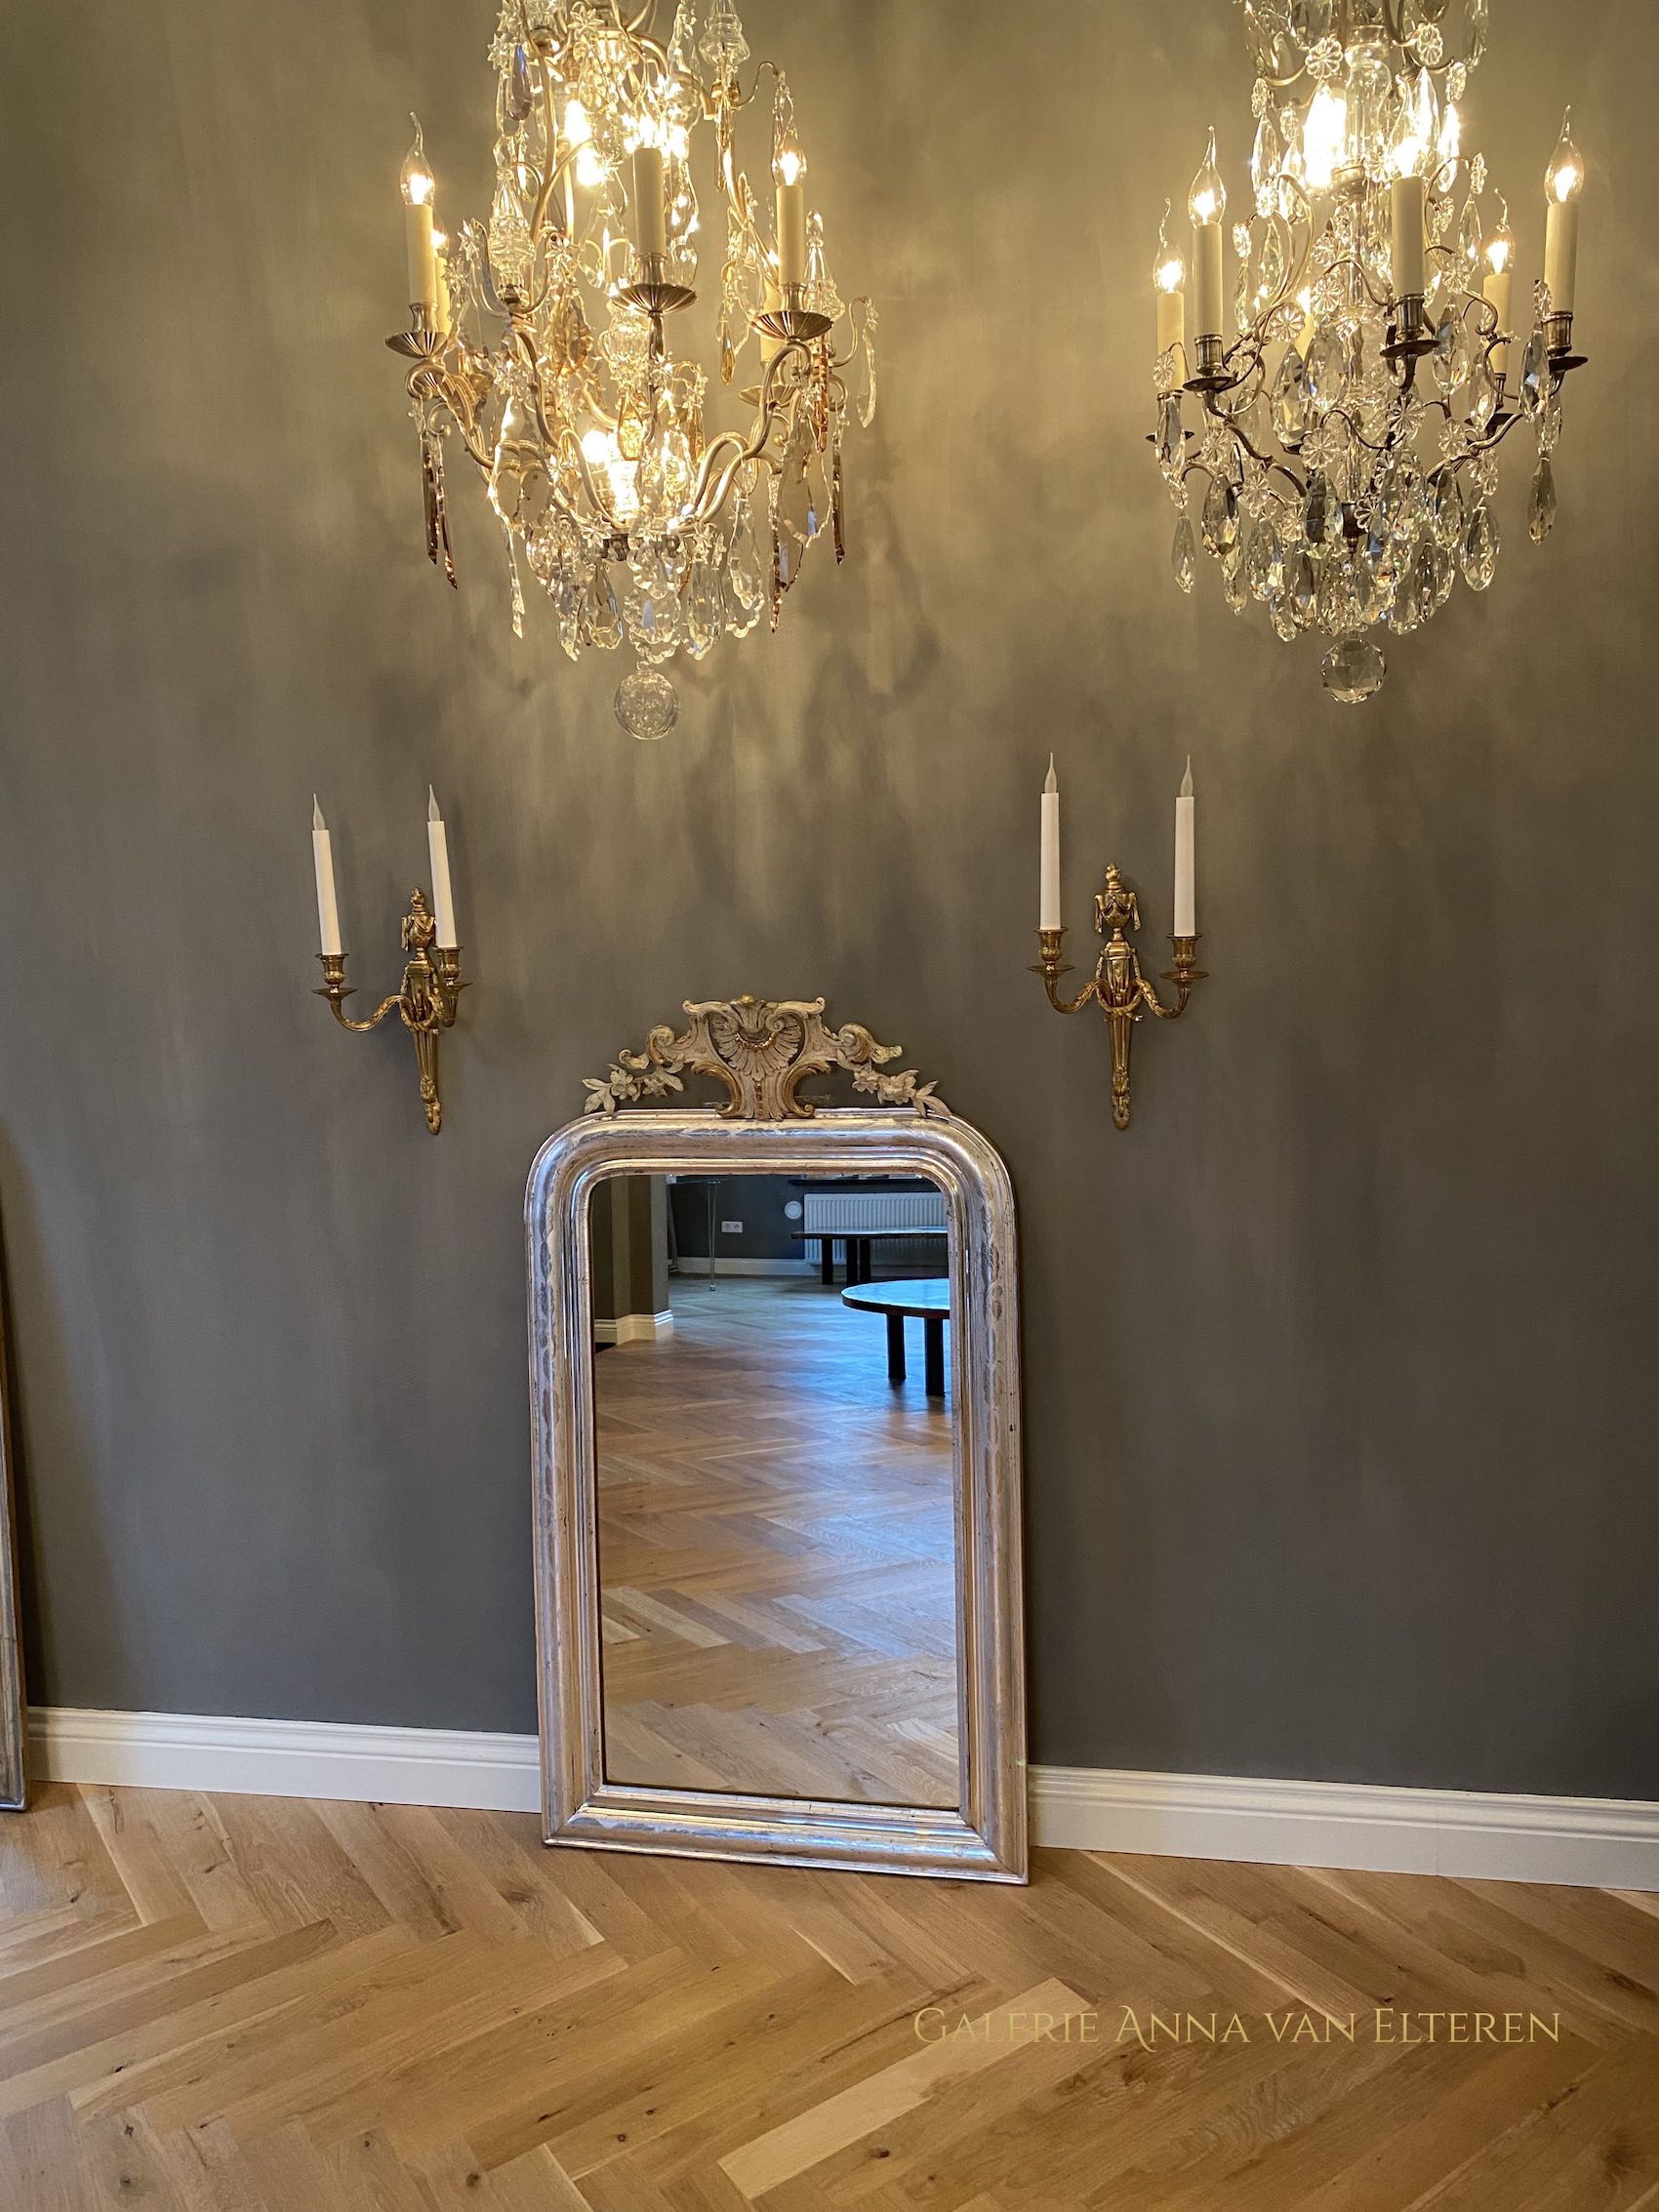 19th c. antique French mirror with a crest